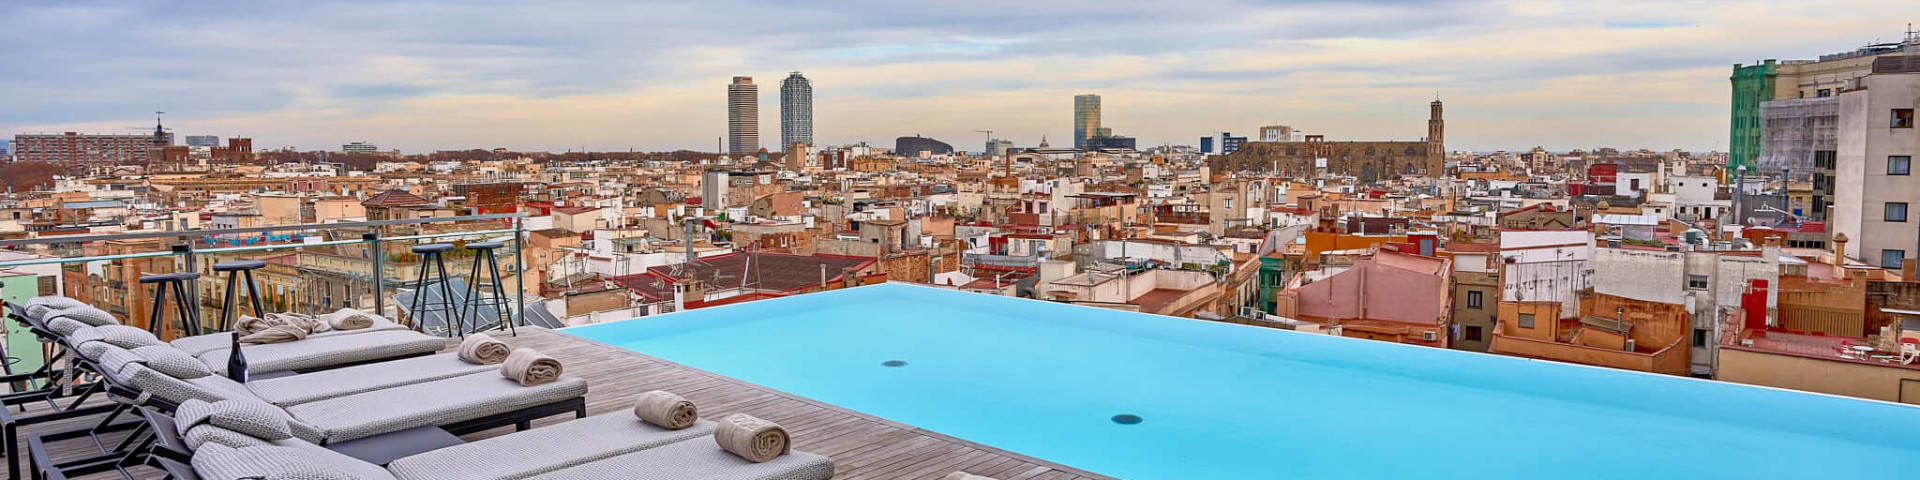 Barcelona's Best Rooftop Bars and Terraces